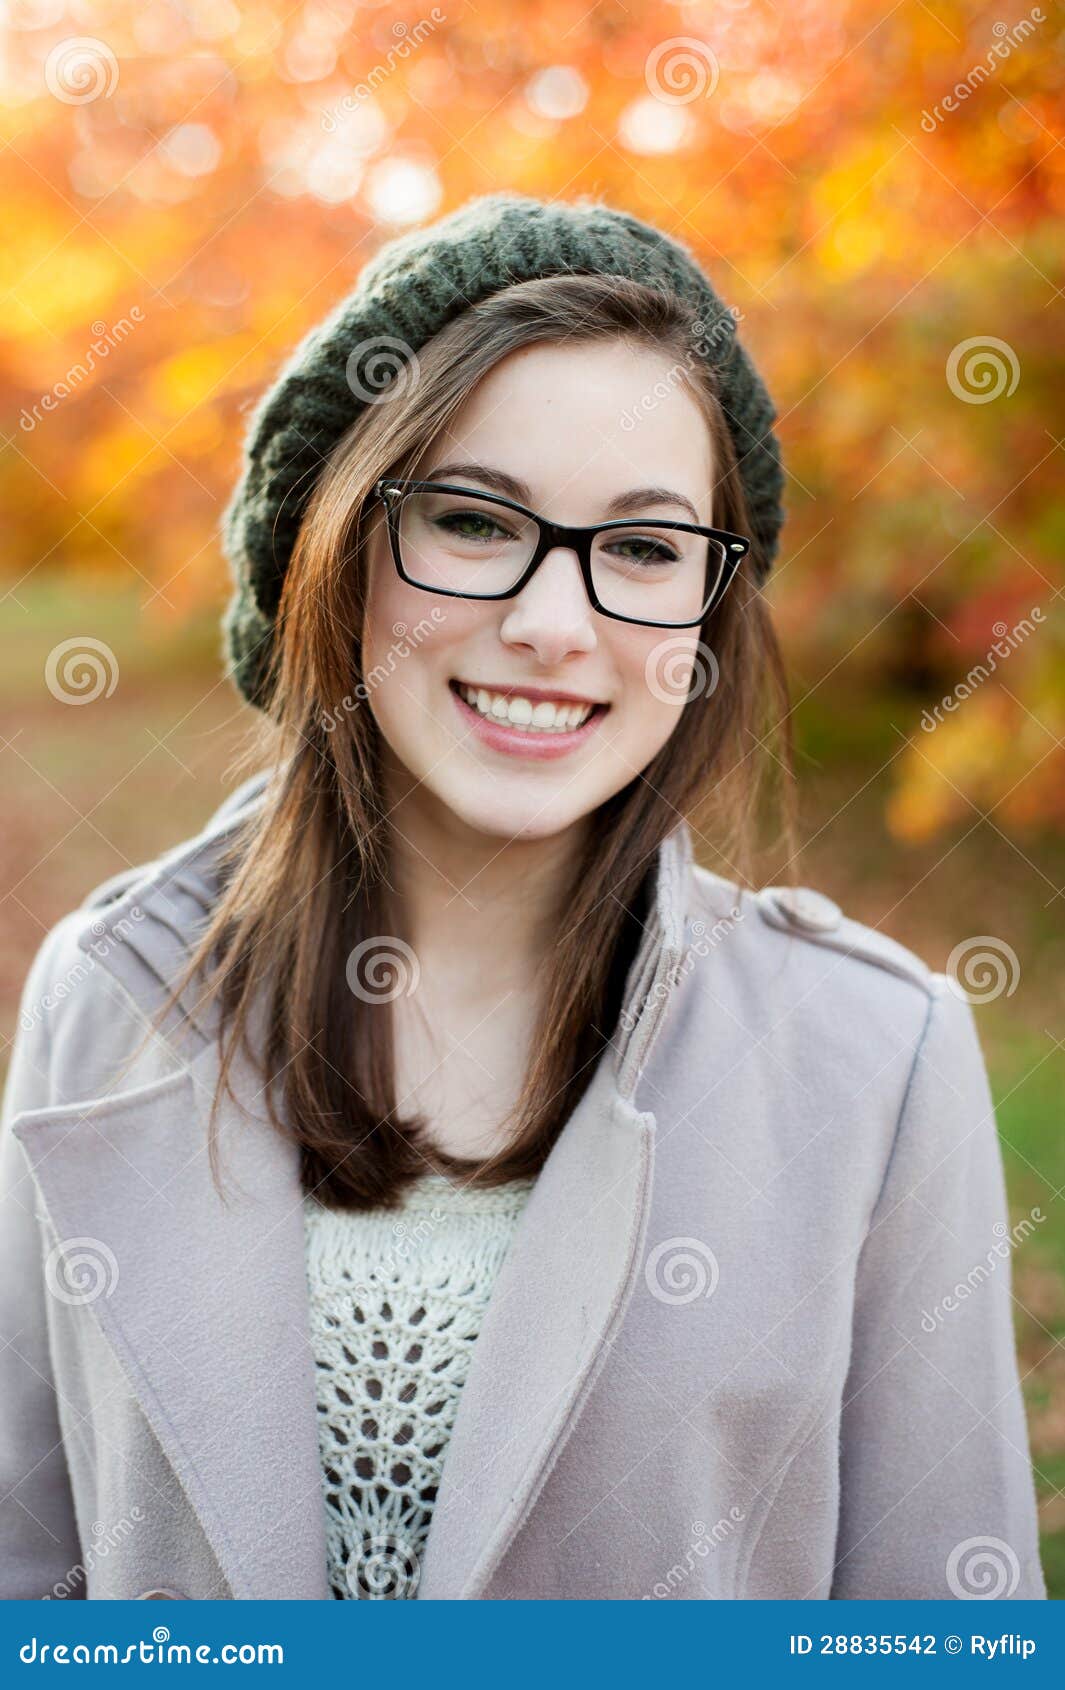 young-woman-wearing-glasses-smiling-2883